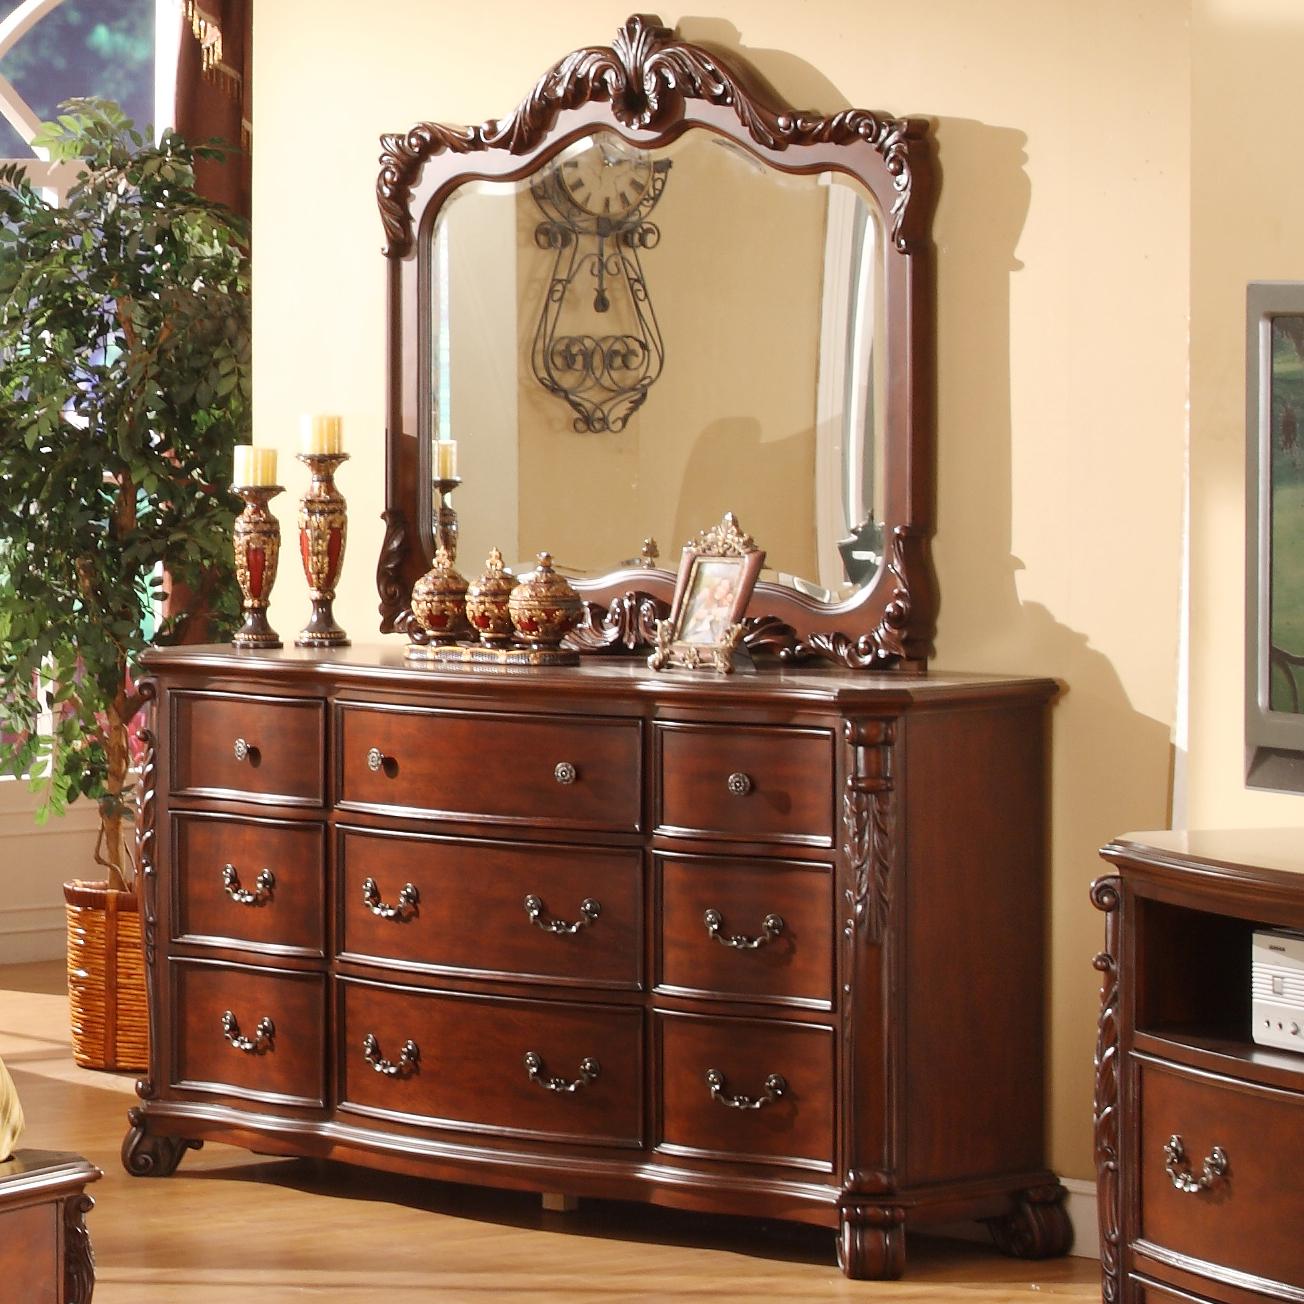 Dresser with mirror Lifestyle Frenchy dresser and mirror set - item number: c9642a-040-9dch + OUVEKUK